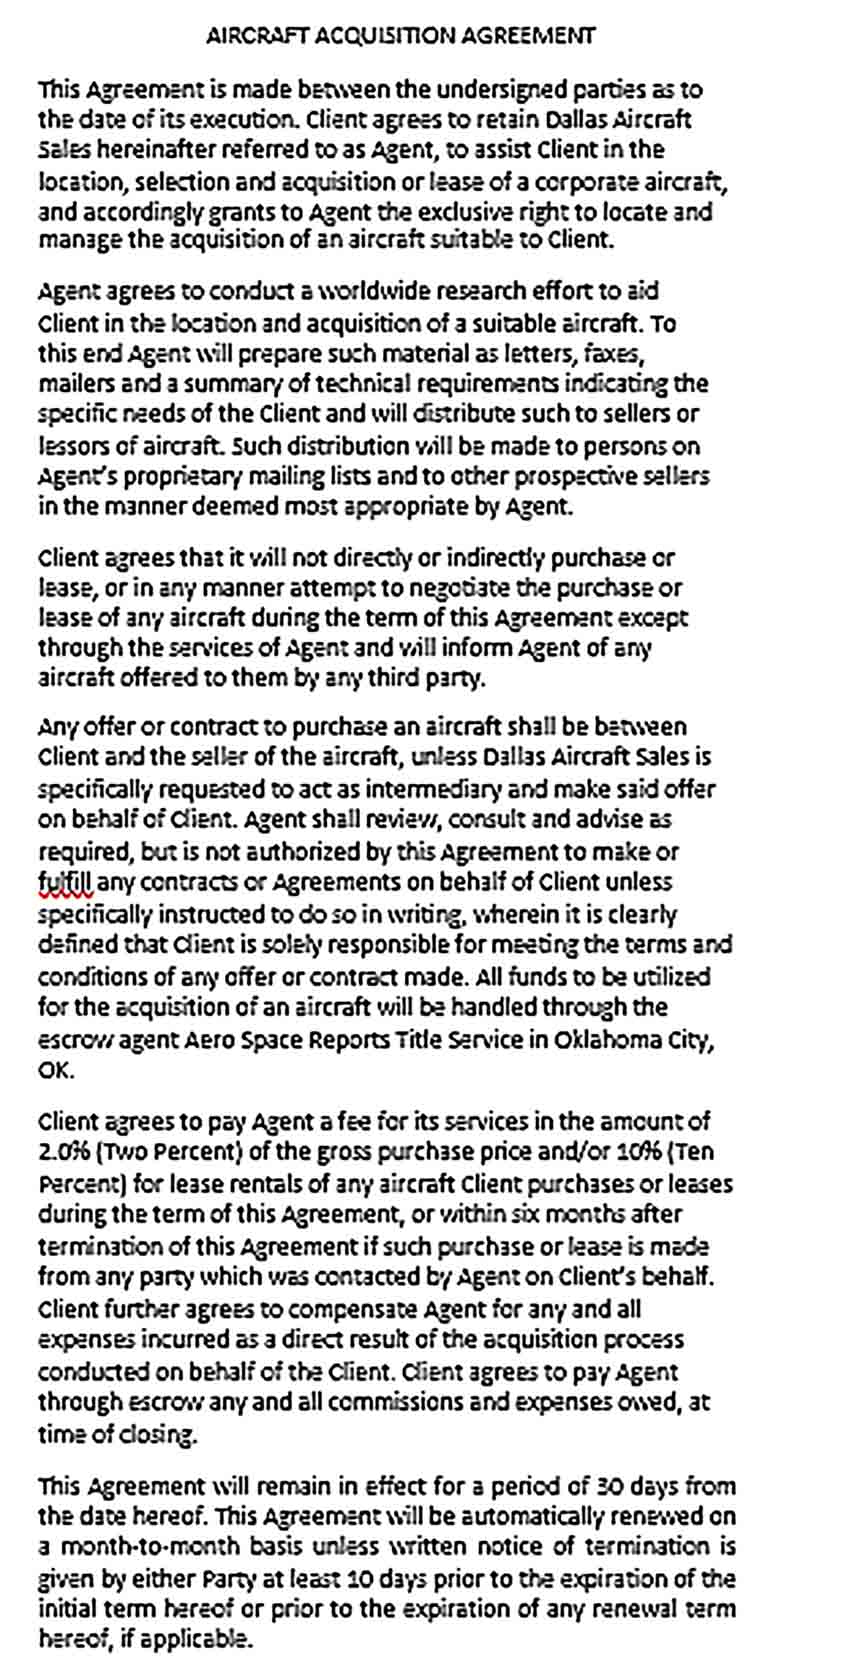 Sample Aircraft Acquisition Agreement